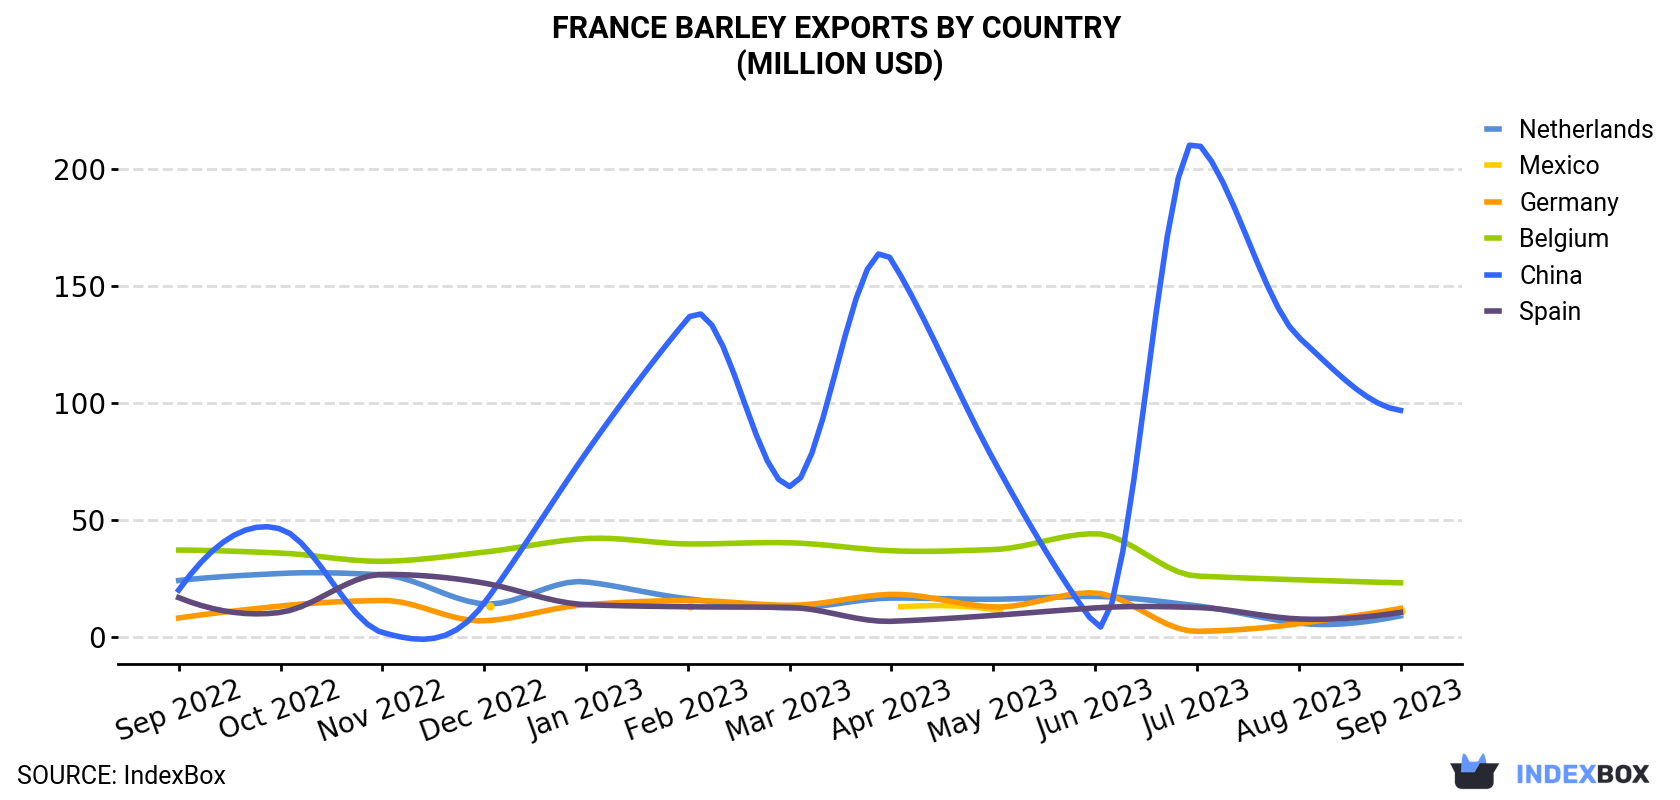 France Barley Exports By Country (Million USD)